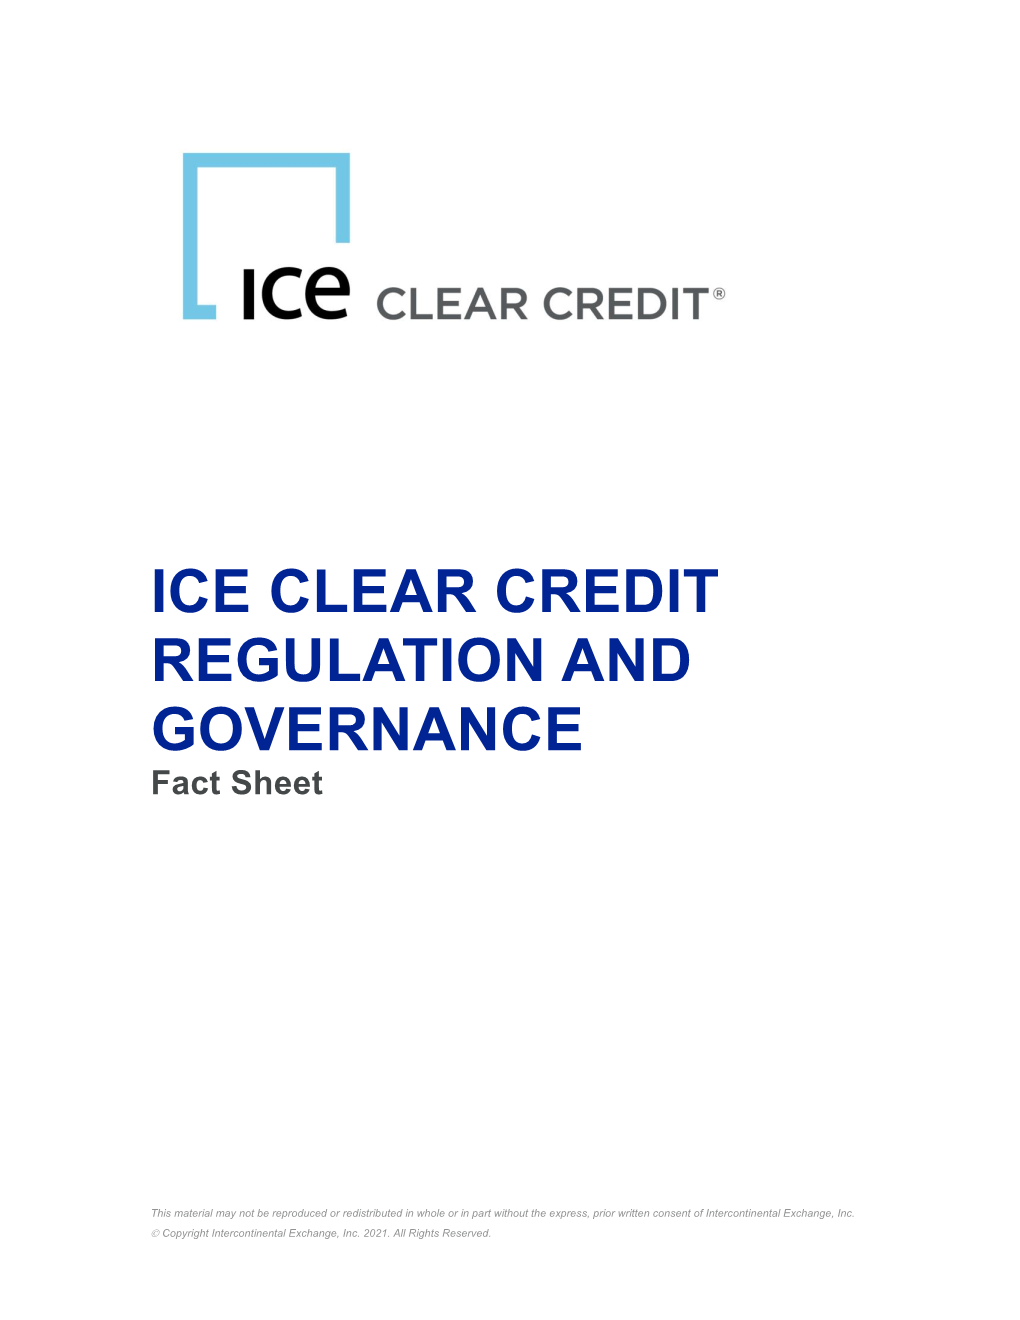 ICE CLEAR CREDIT REGULATION and GOVERNANCE Fact Sheet